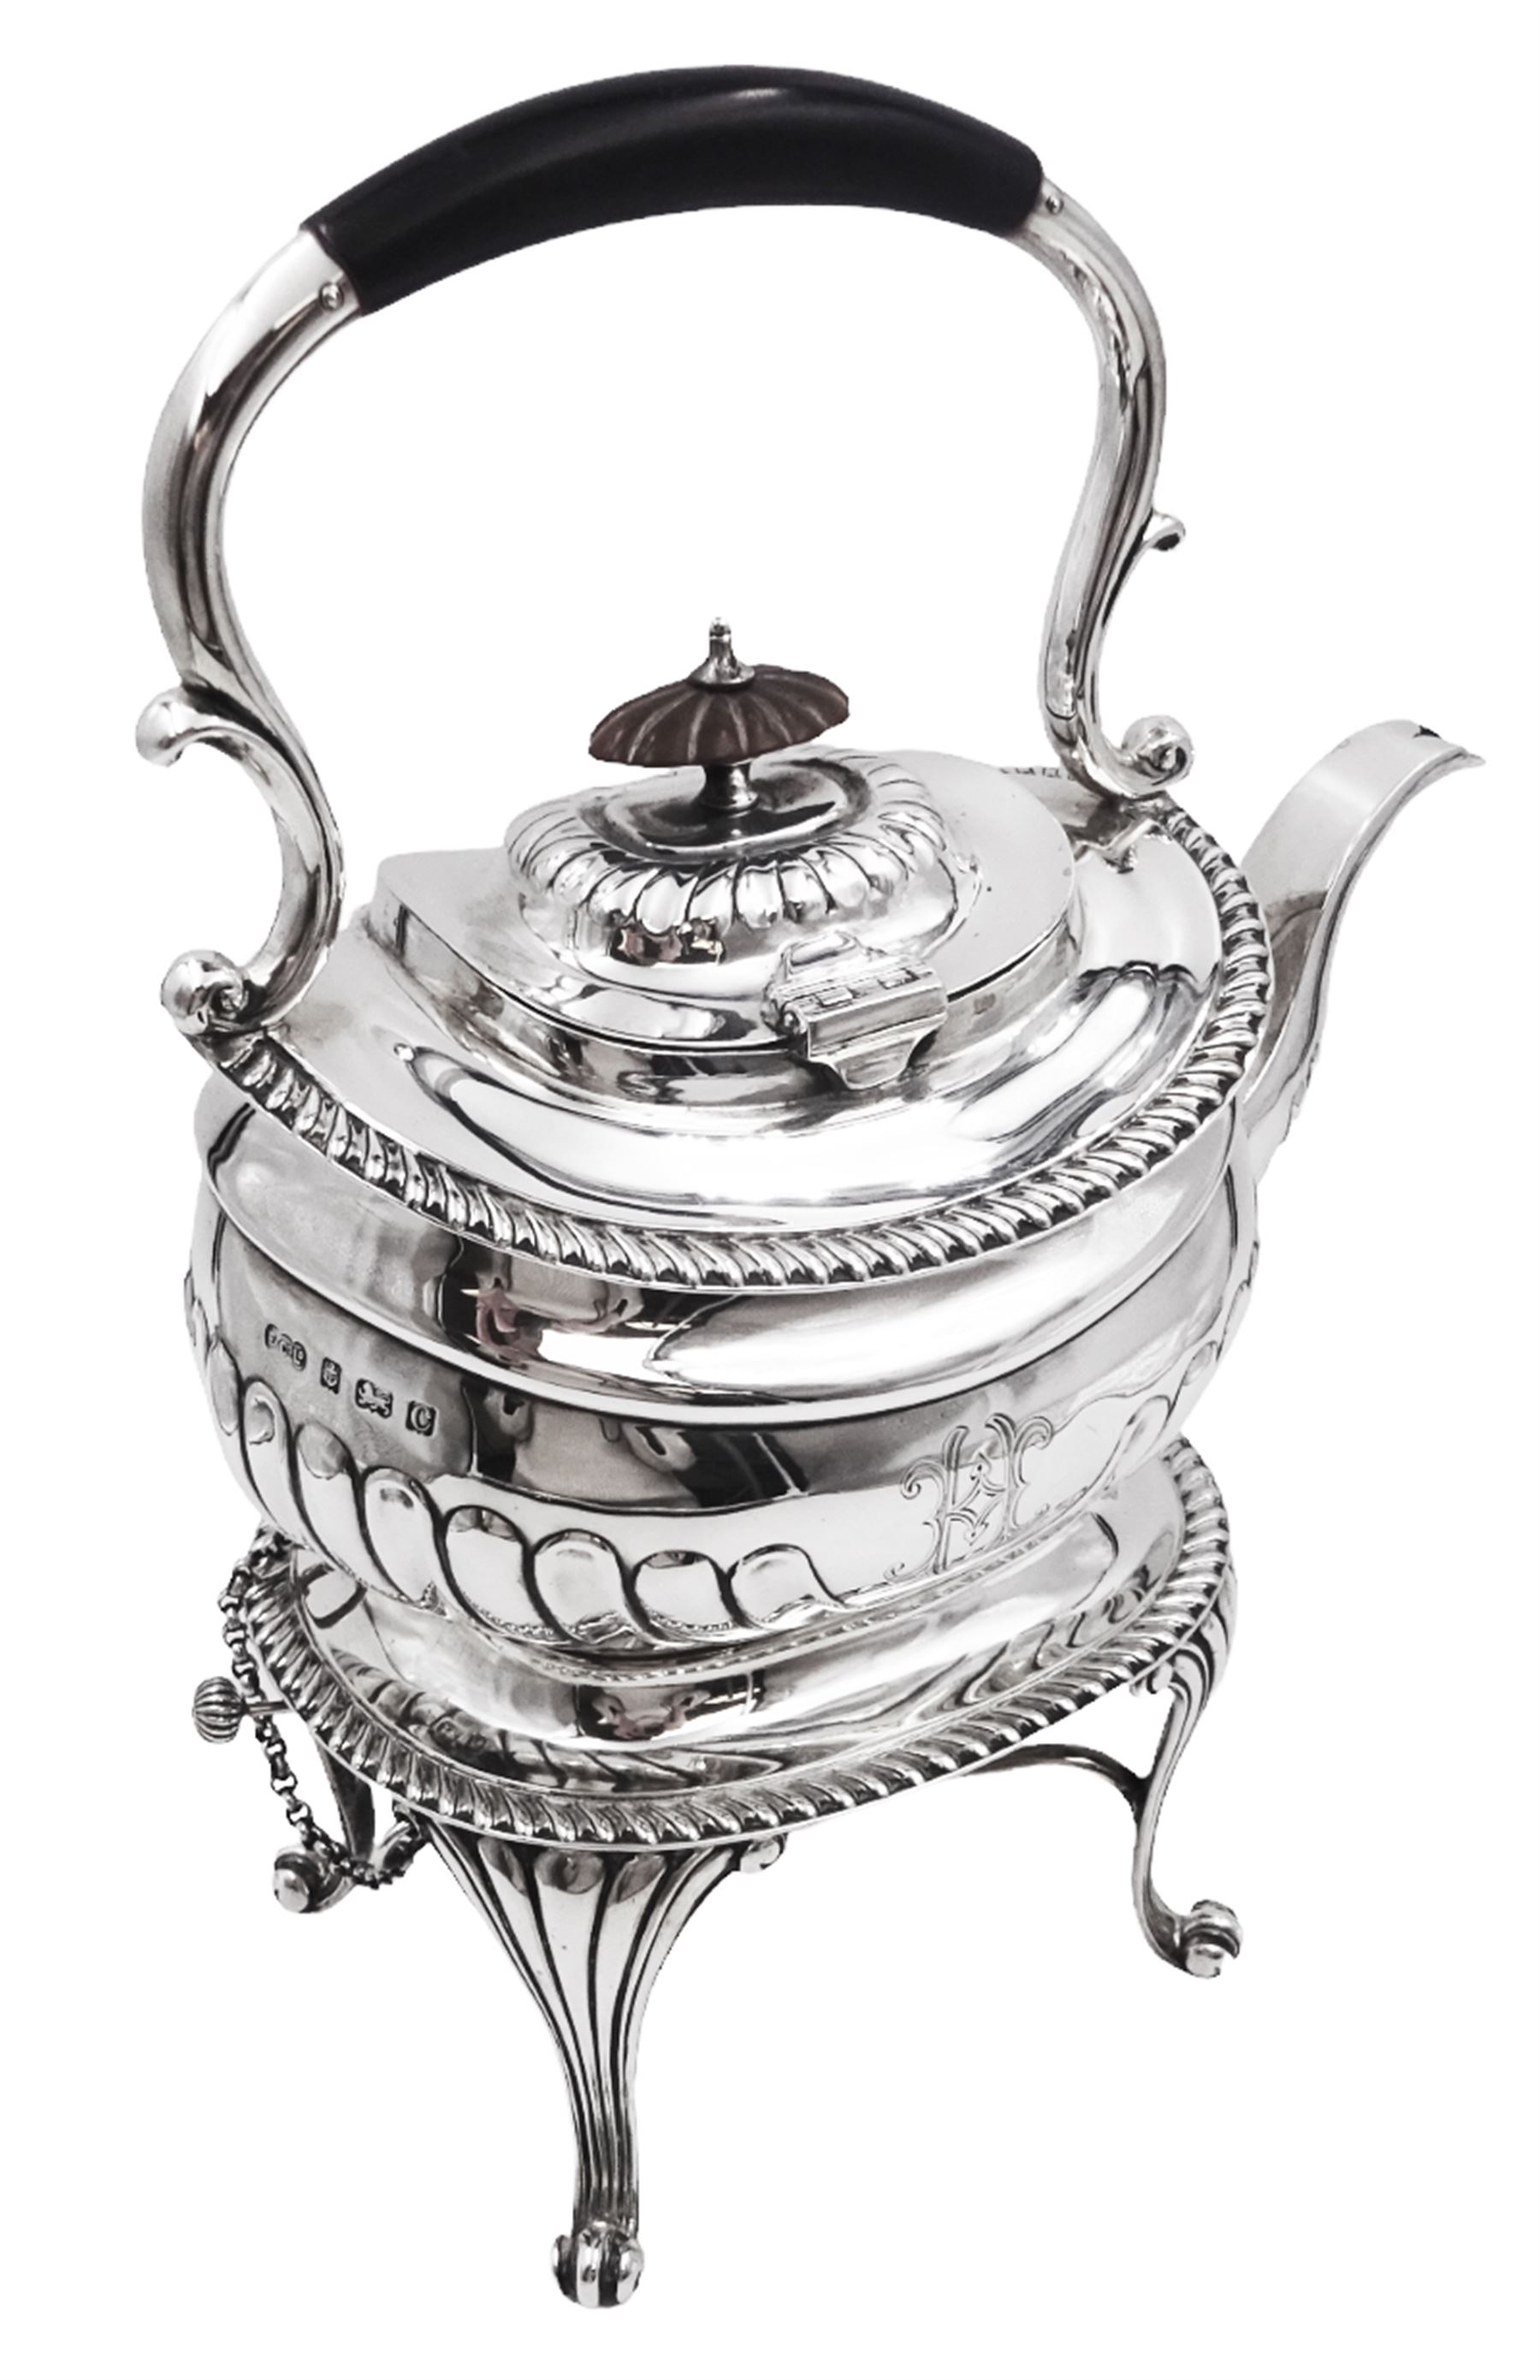 Edwardian silver spirit kettle on stand - Image 2 of 12